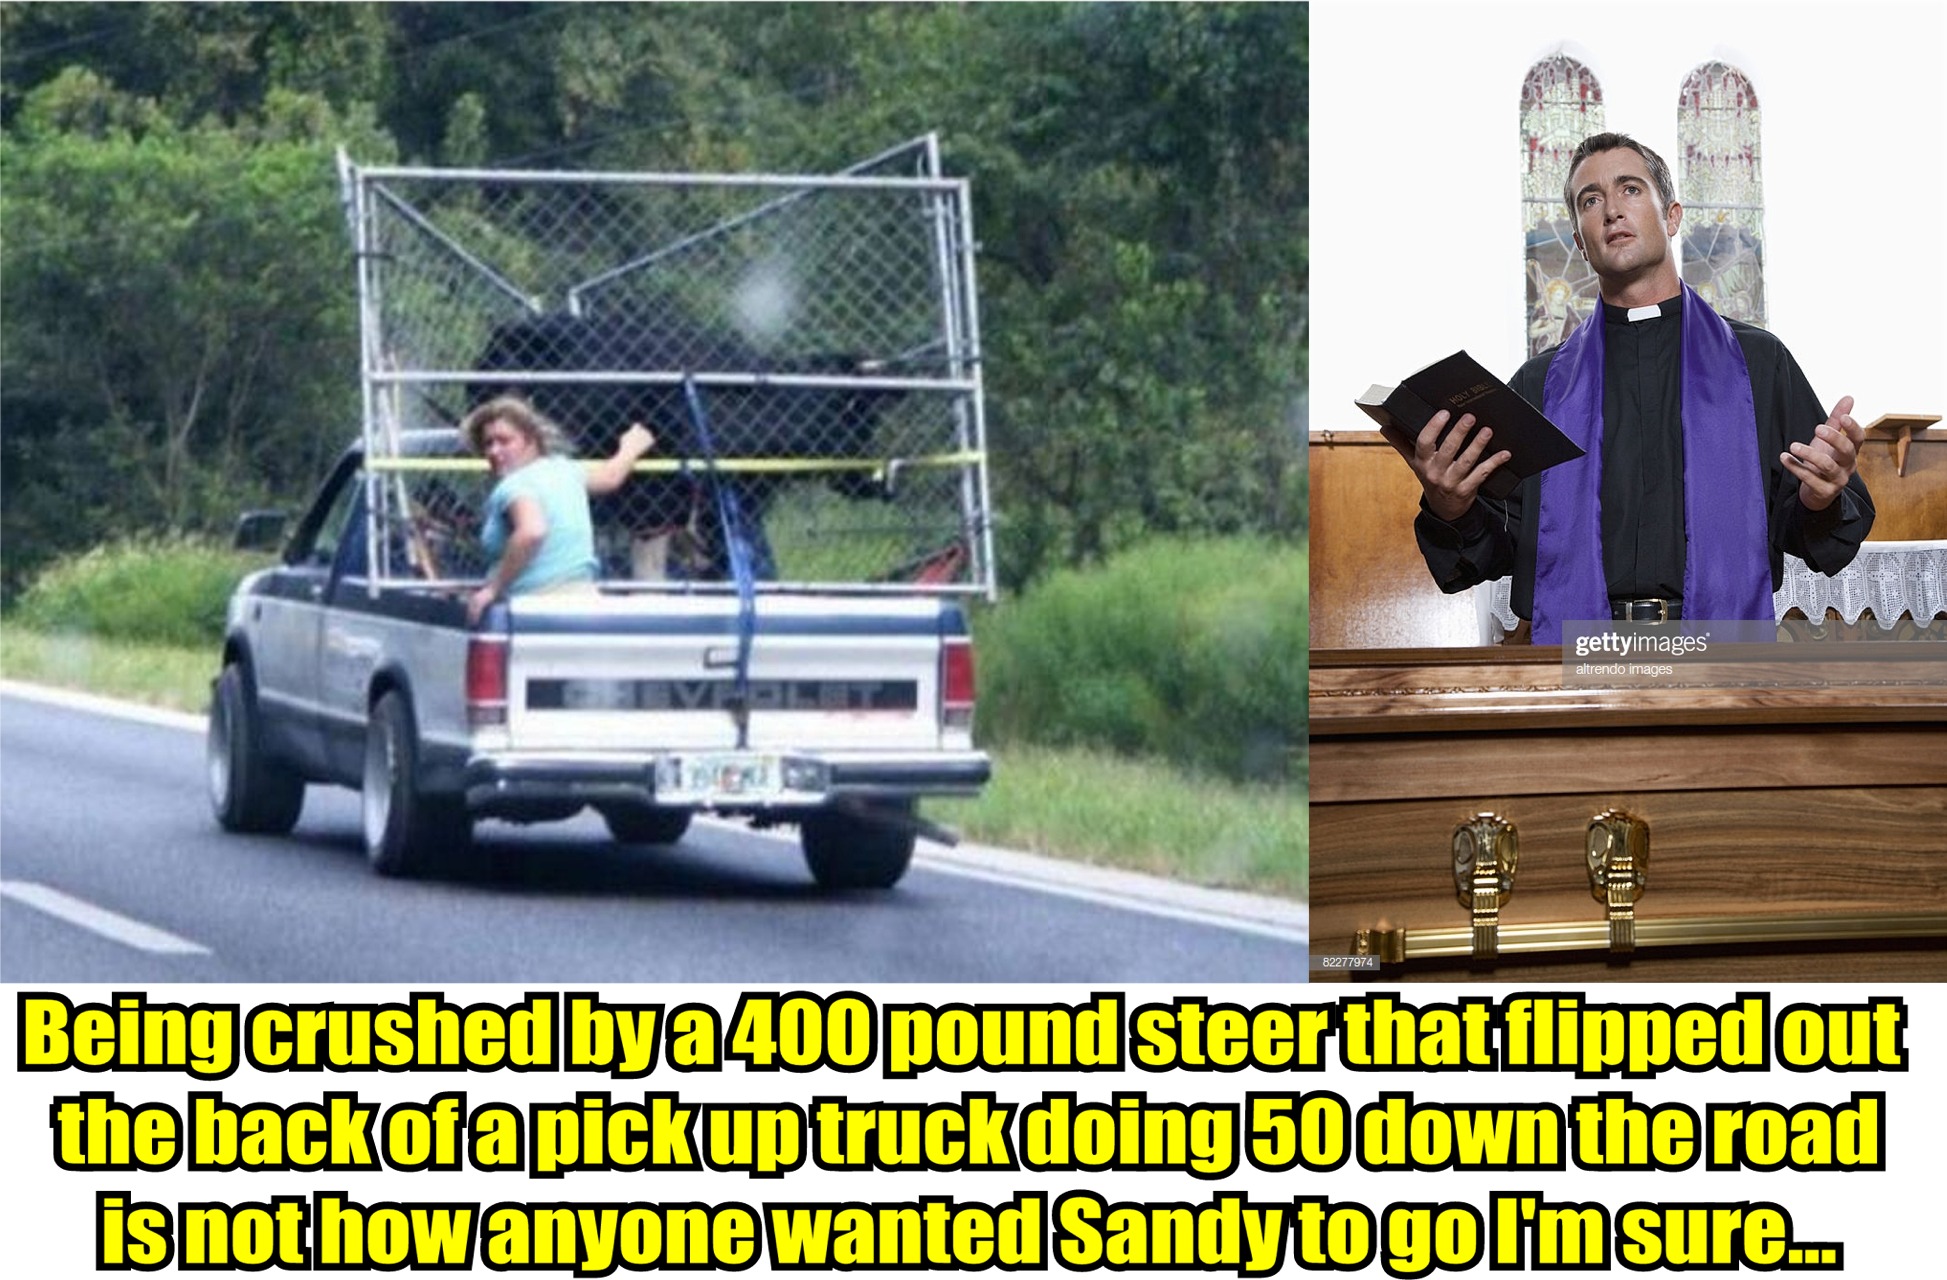 redneck pickup truck - gettyimapes Fin Being crushedbya400 poundsteerthat flipped out the backofapickup truck doing 50 down the road is not howanyone wanted Sandyto go I'm sure..